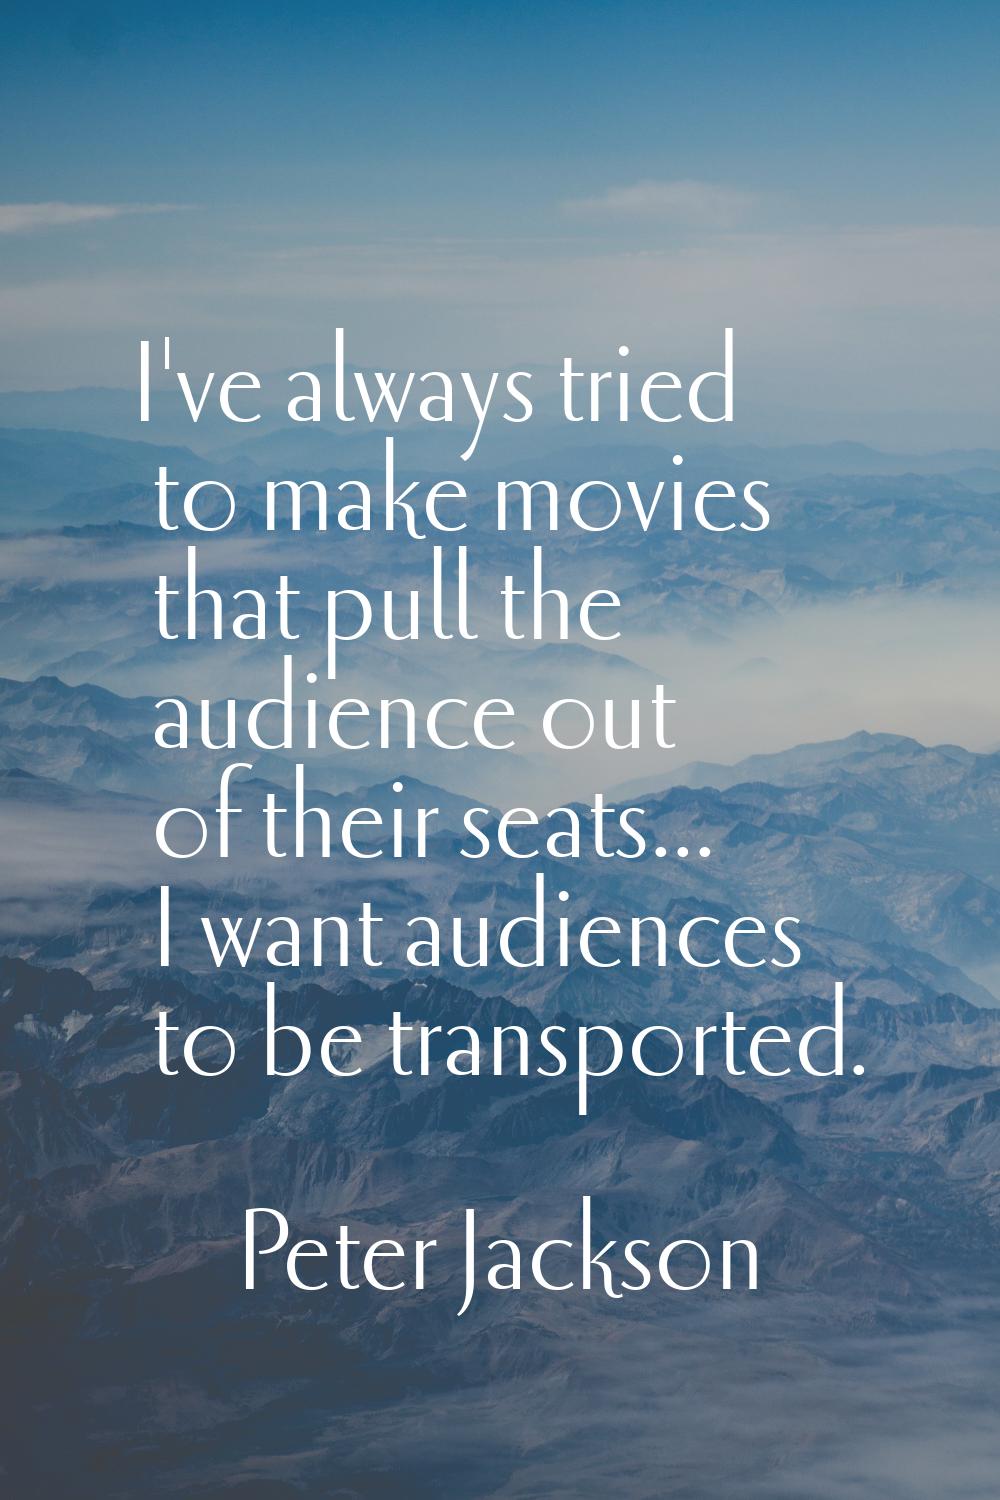 I've always tried to make movies that pull the audience out of their seats... I want audiences to b